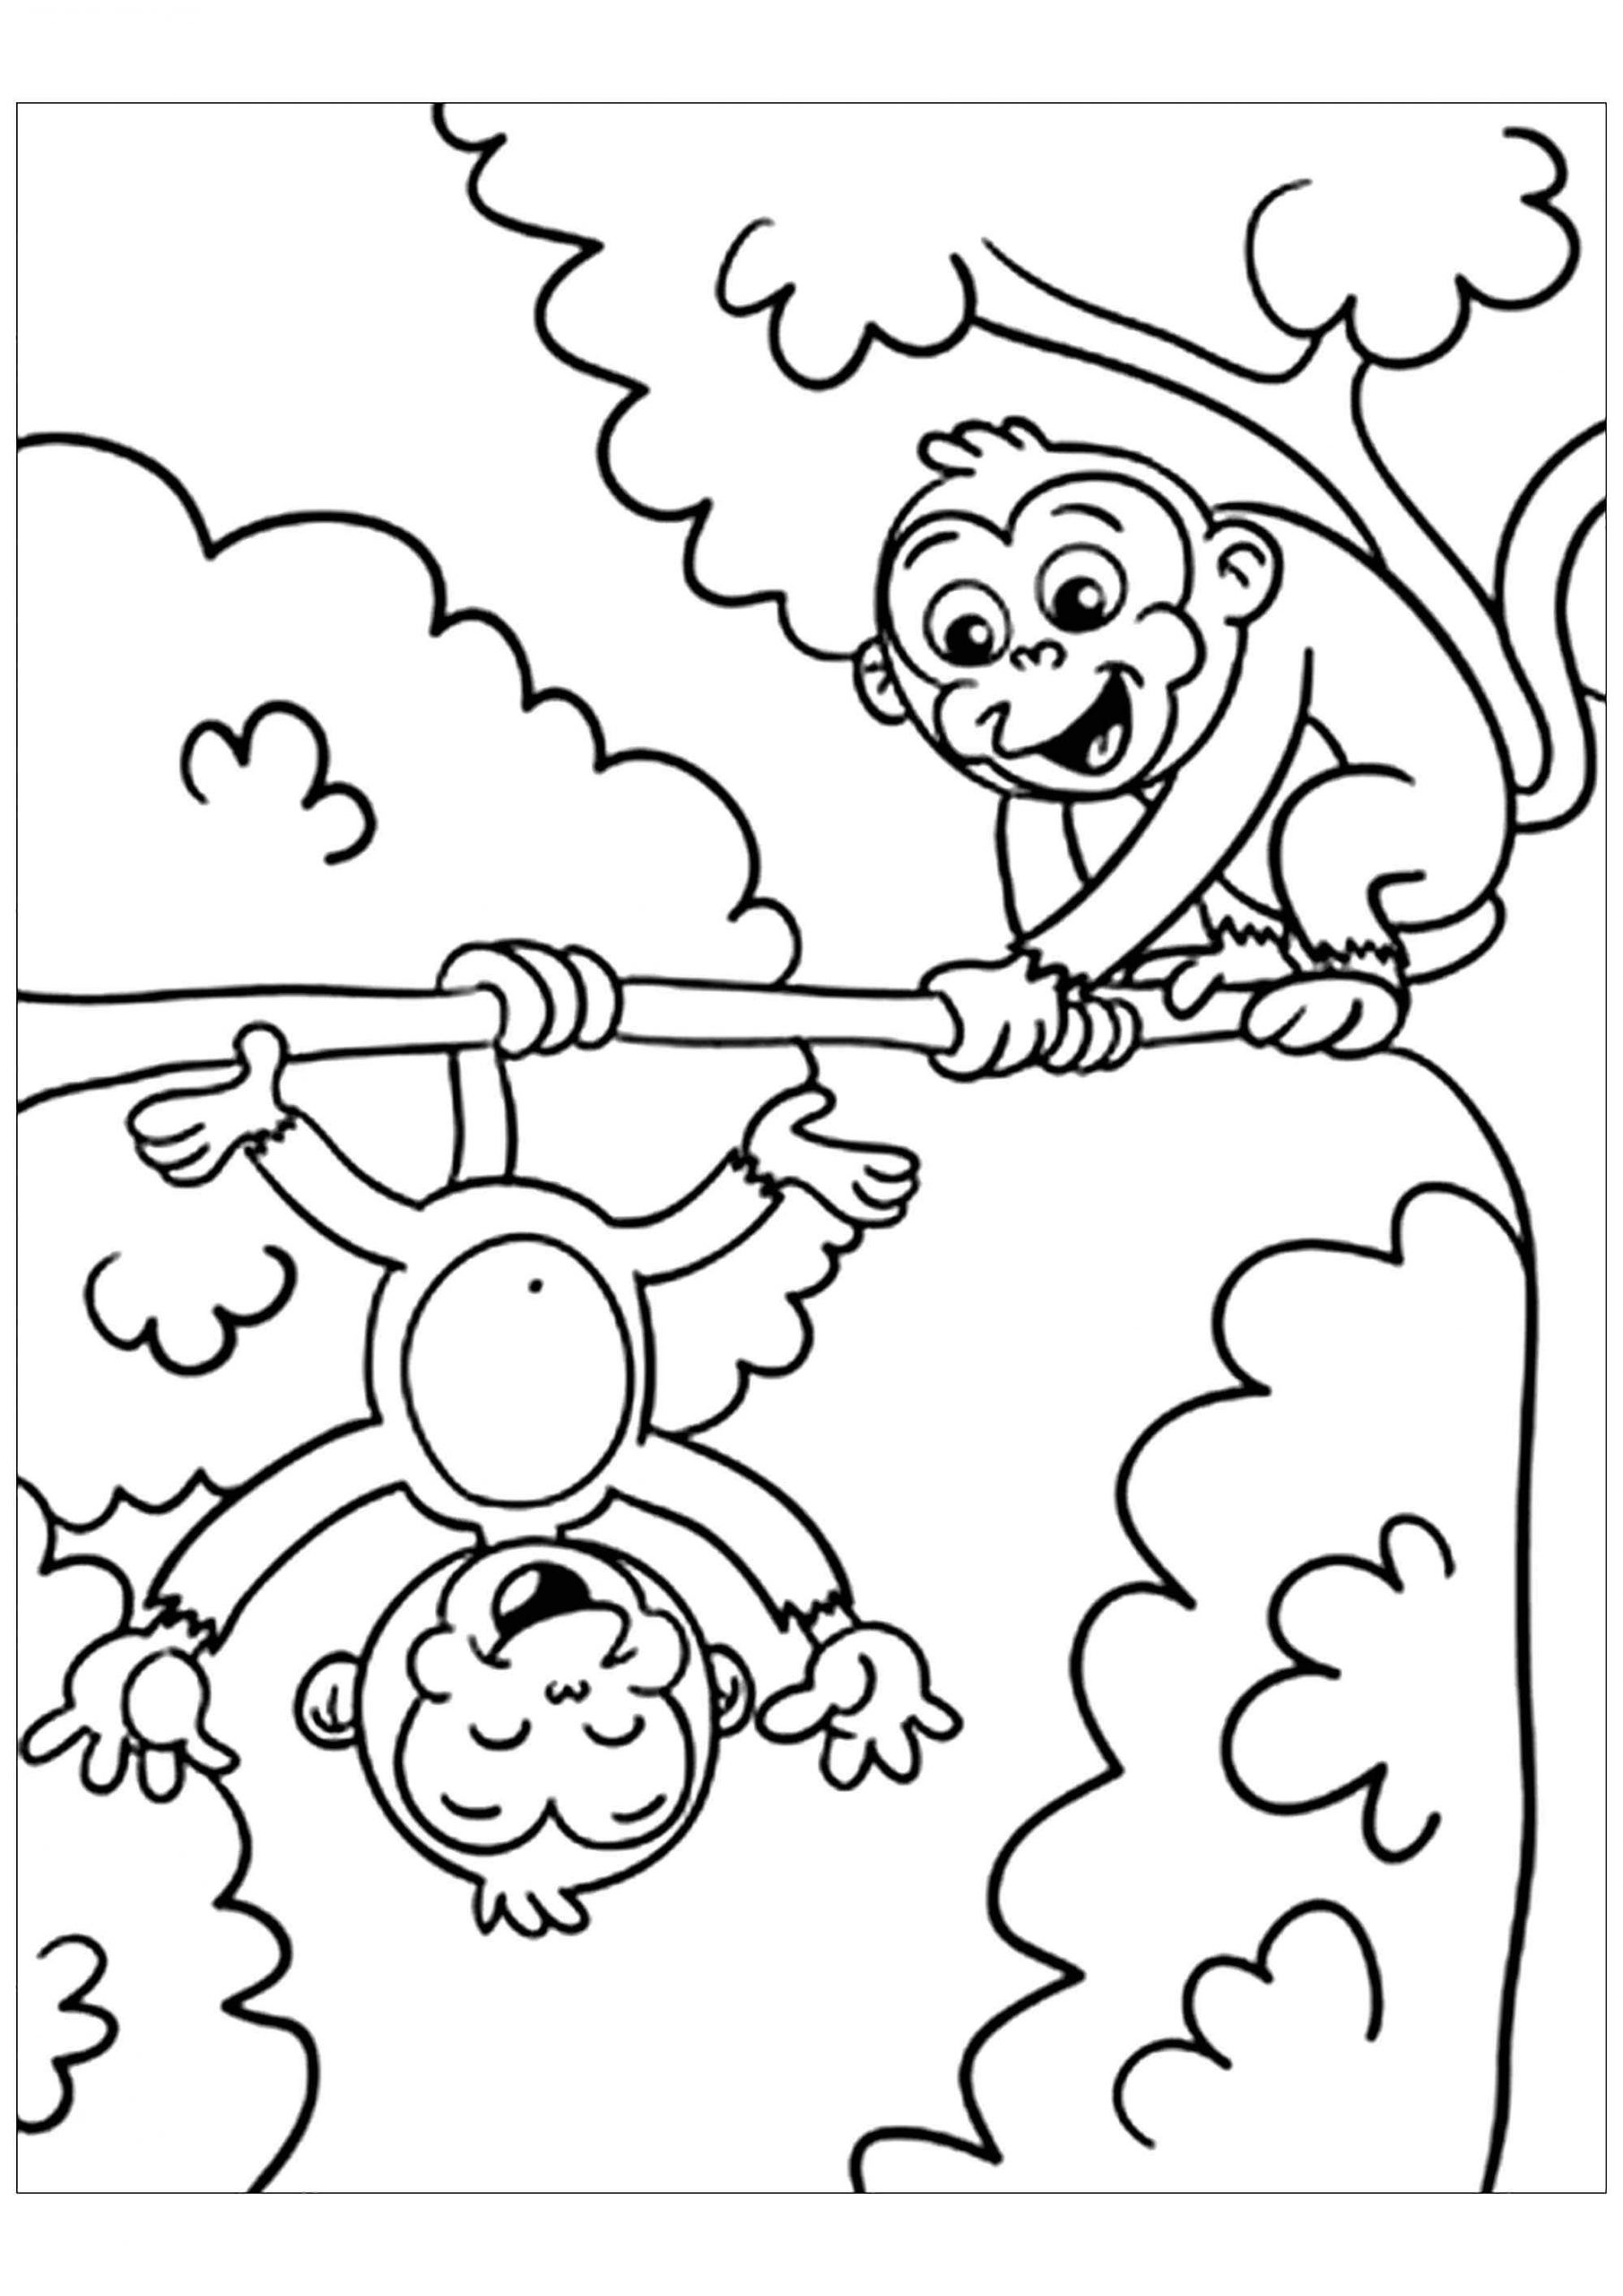 New Cute Monkey For Kids Coloring Page